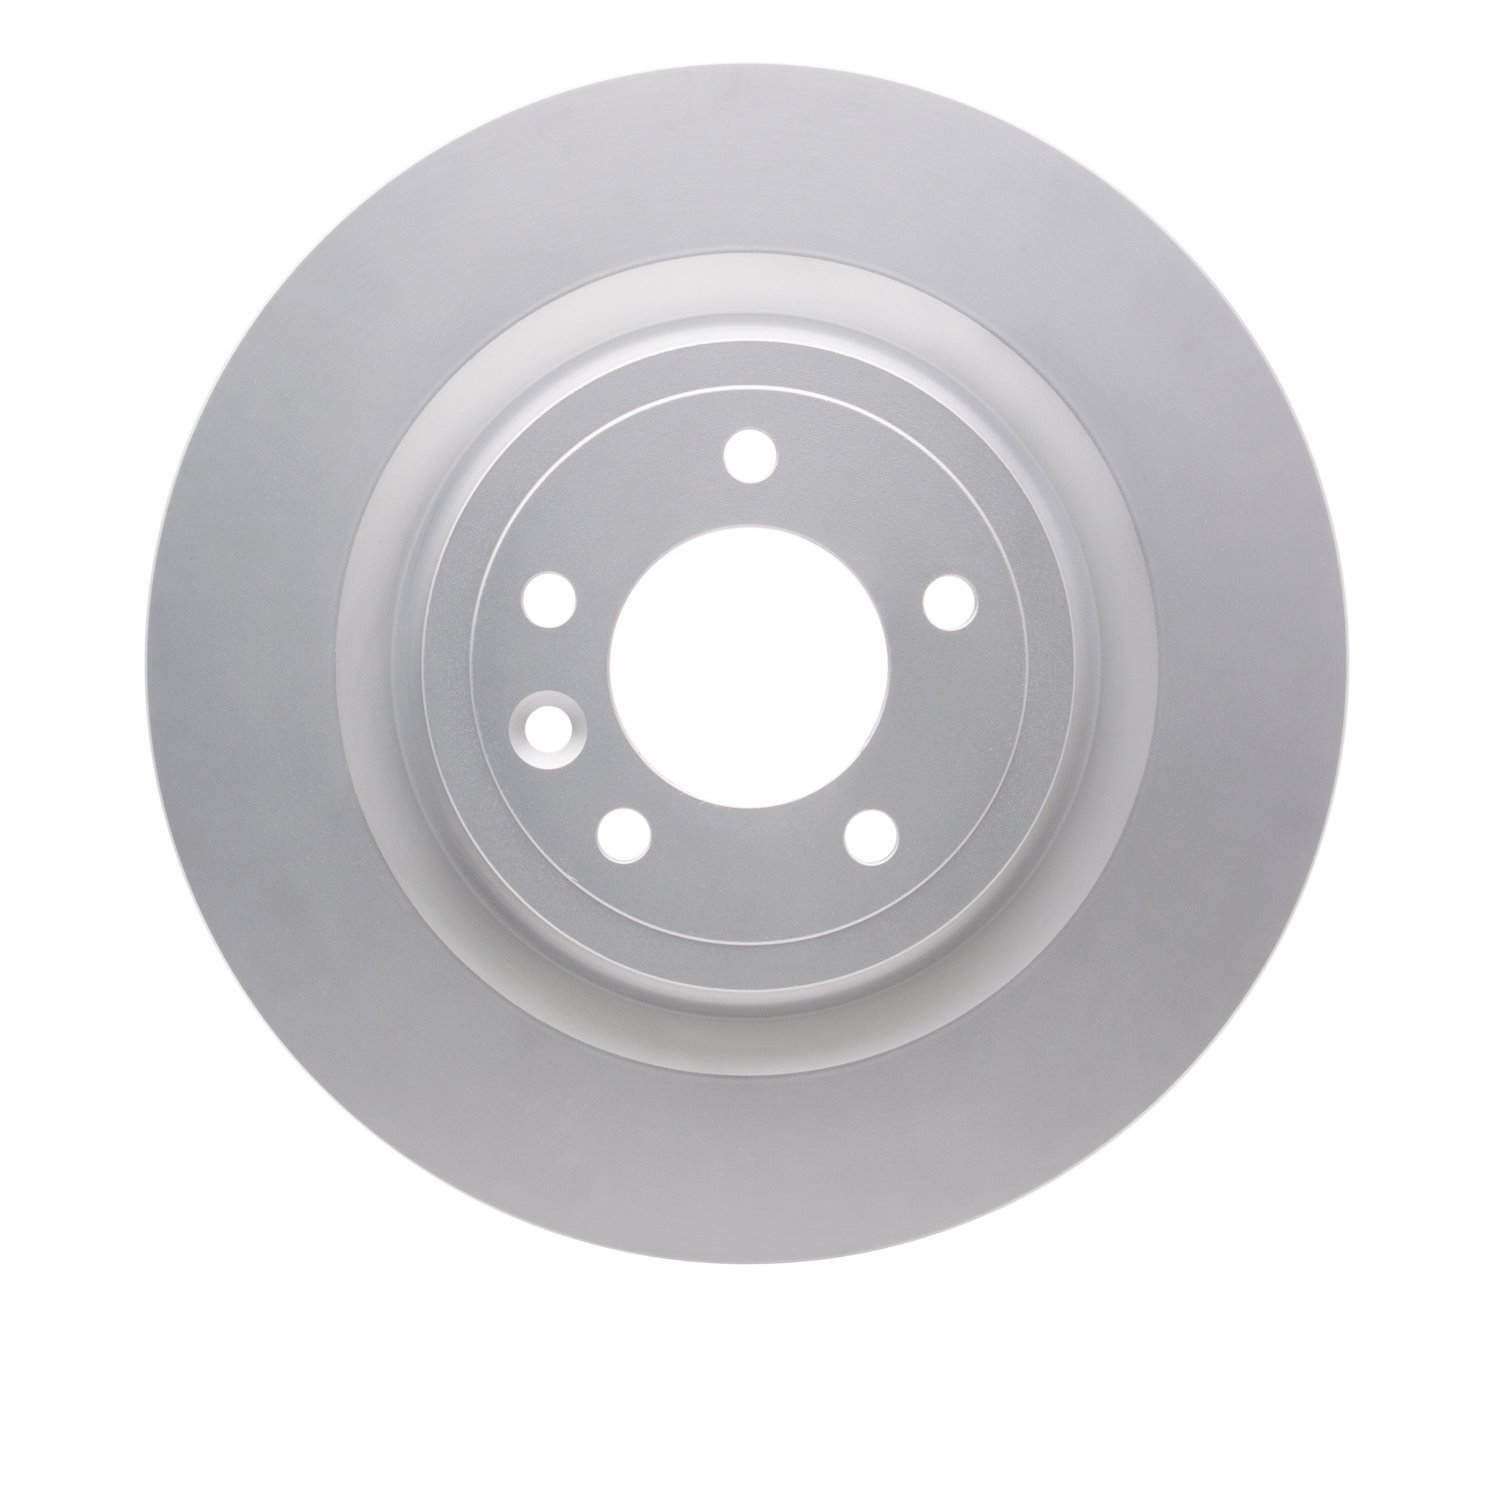 900-11026 GEOMET Hi-Carbon Alloy Brake Rotor [Coated], Fits Select Land Rover, Position: Rear